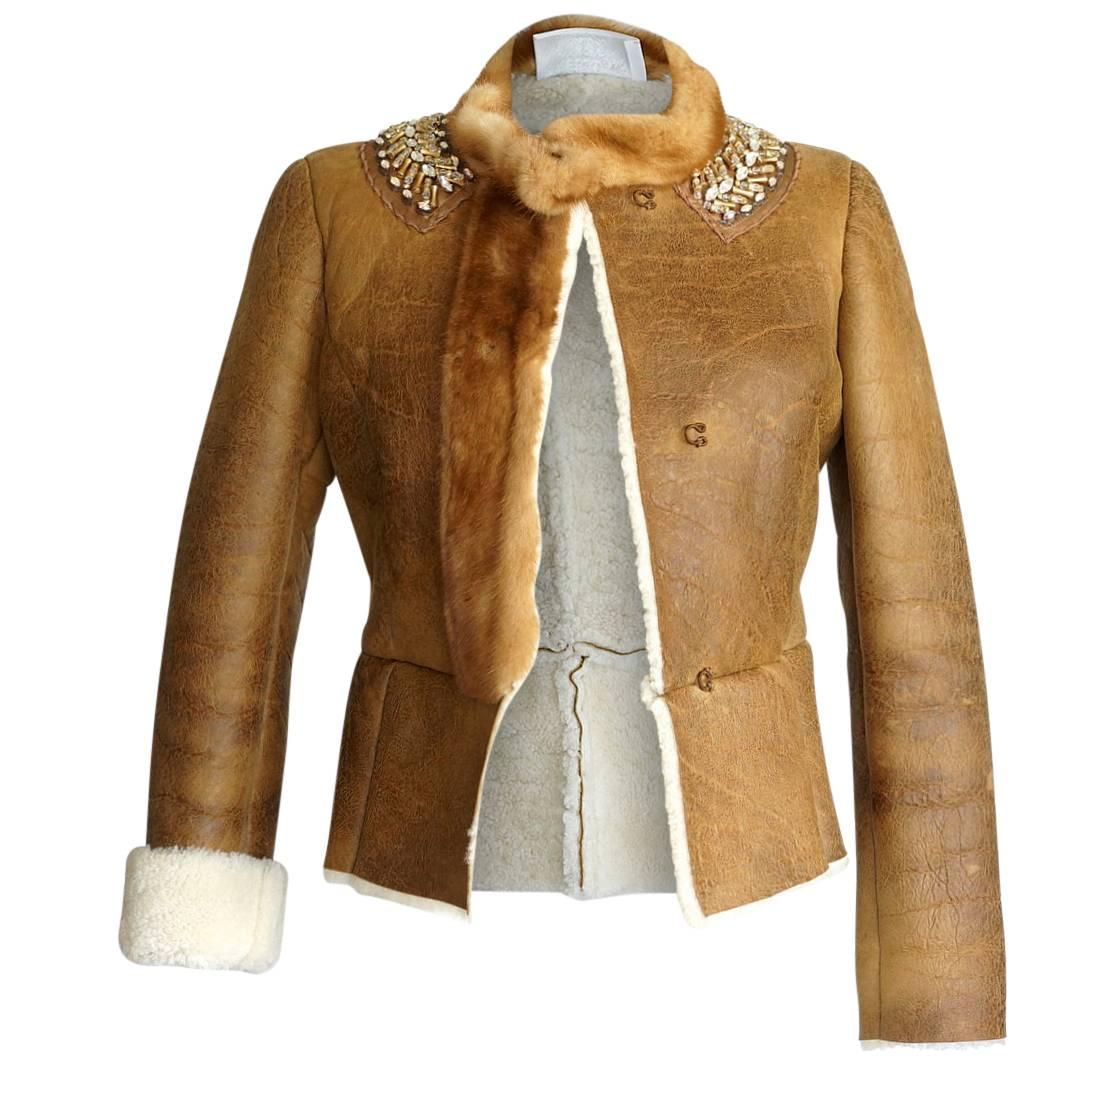 Mightychic offers a Prada superb distressed shearling jacket.      
Shearling accentuated with mink mandarin collar and front trim.
Fabulous diamante and beading around collar.
Front mink placket creates hidden hook and eye closures.
Sleeves can be